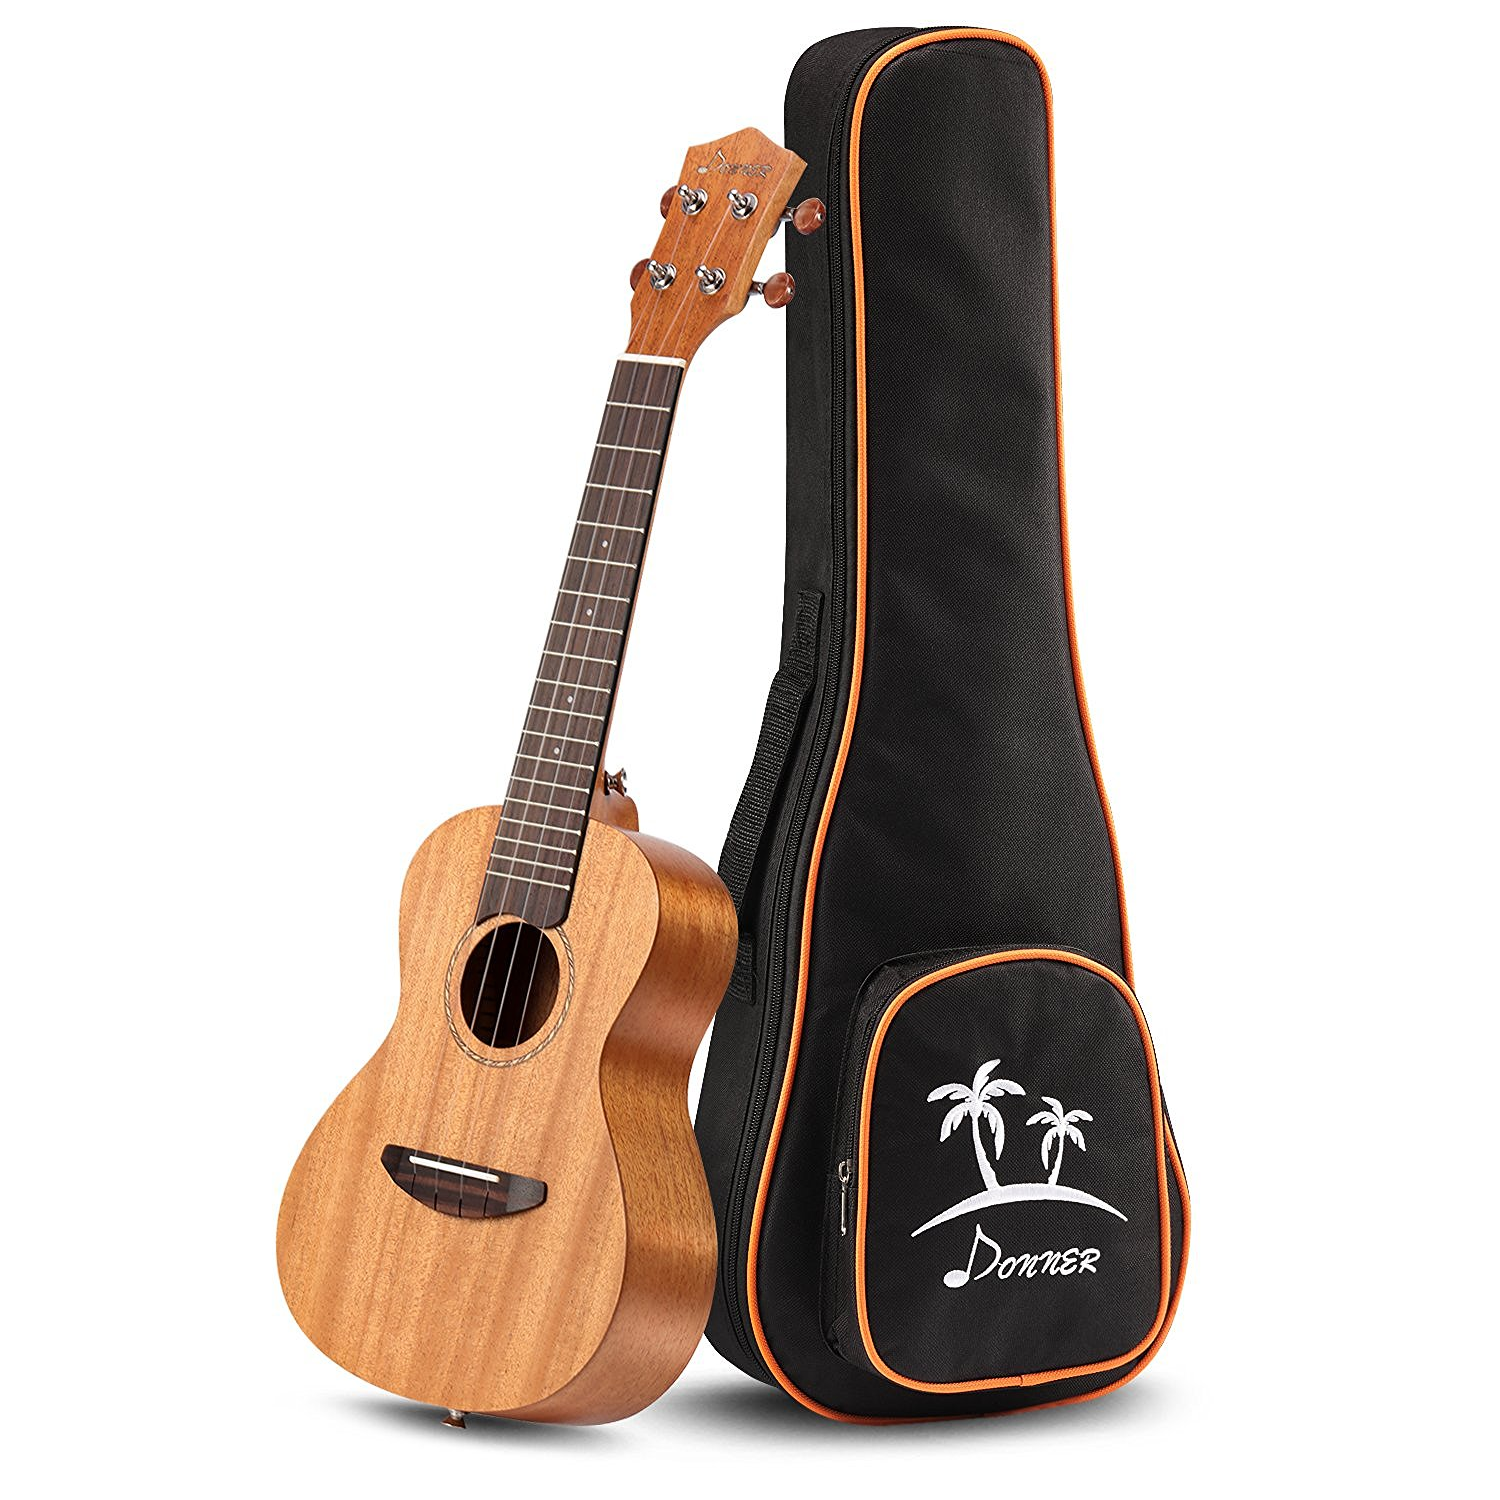 Donner Mahagany Ukulele with Case/Strap and More Only $53.50 Shipped!